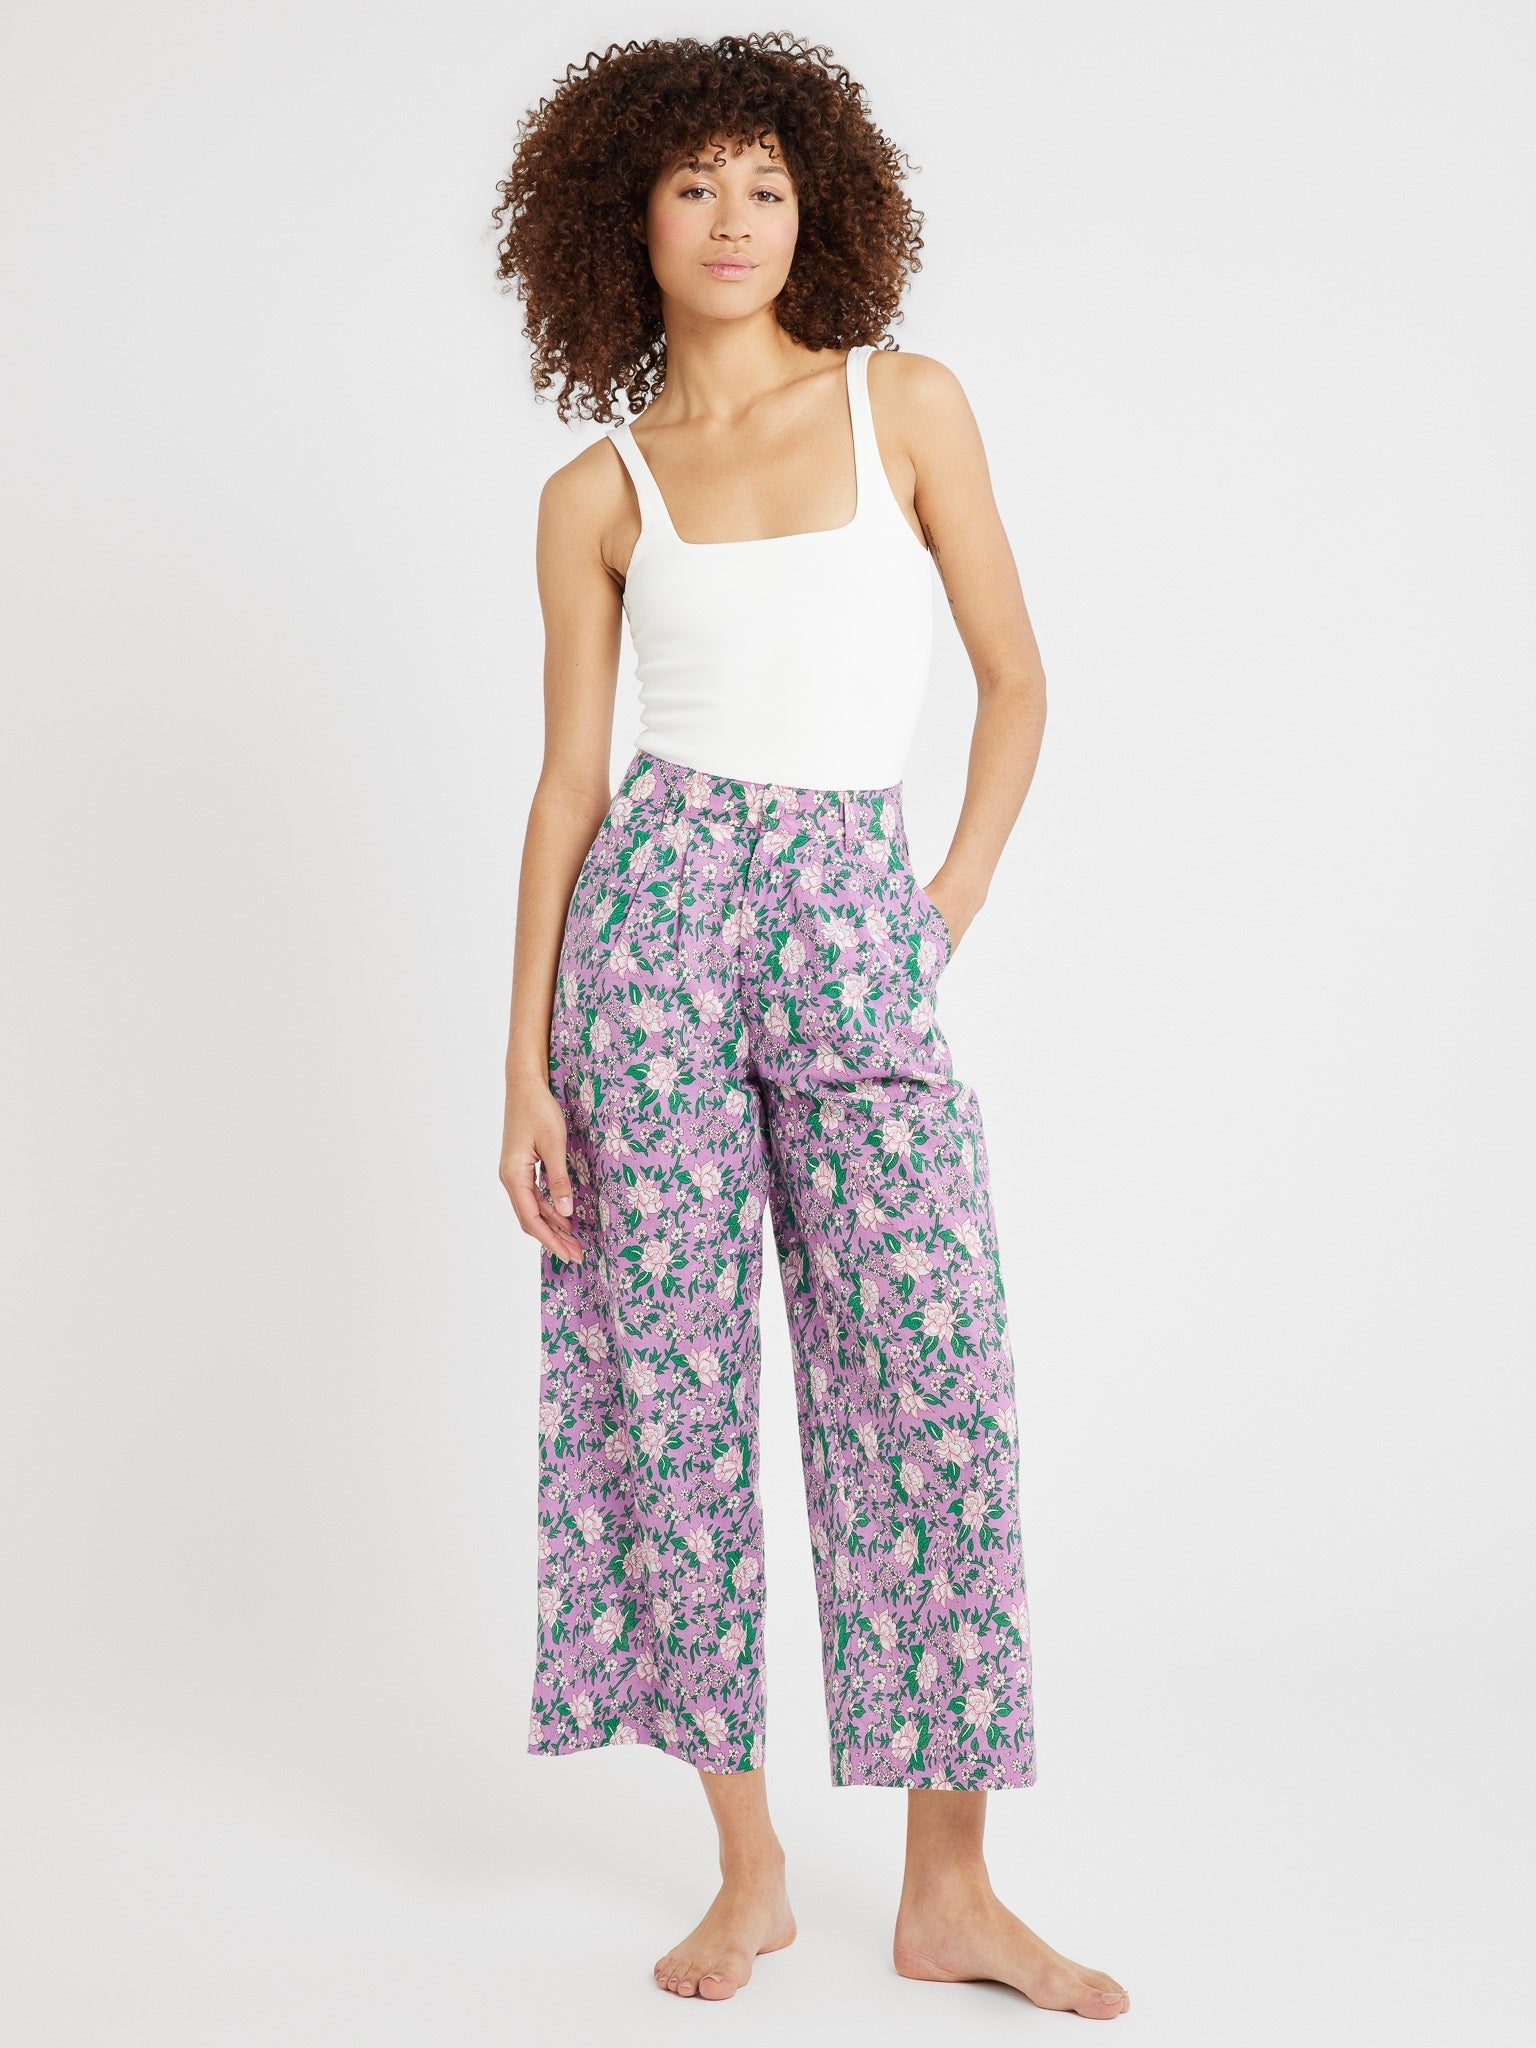 MILLE Clothing James Pant in Purple Rose